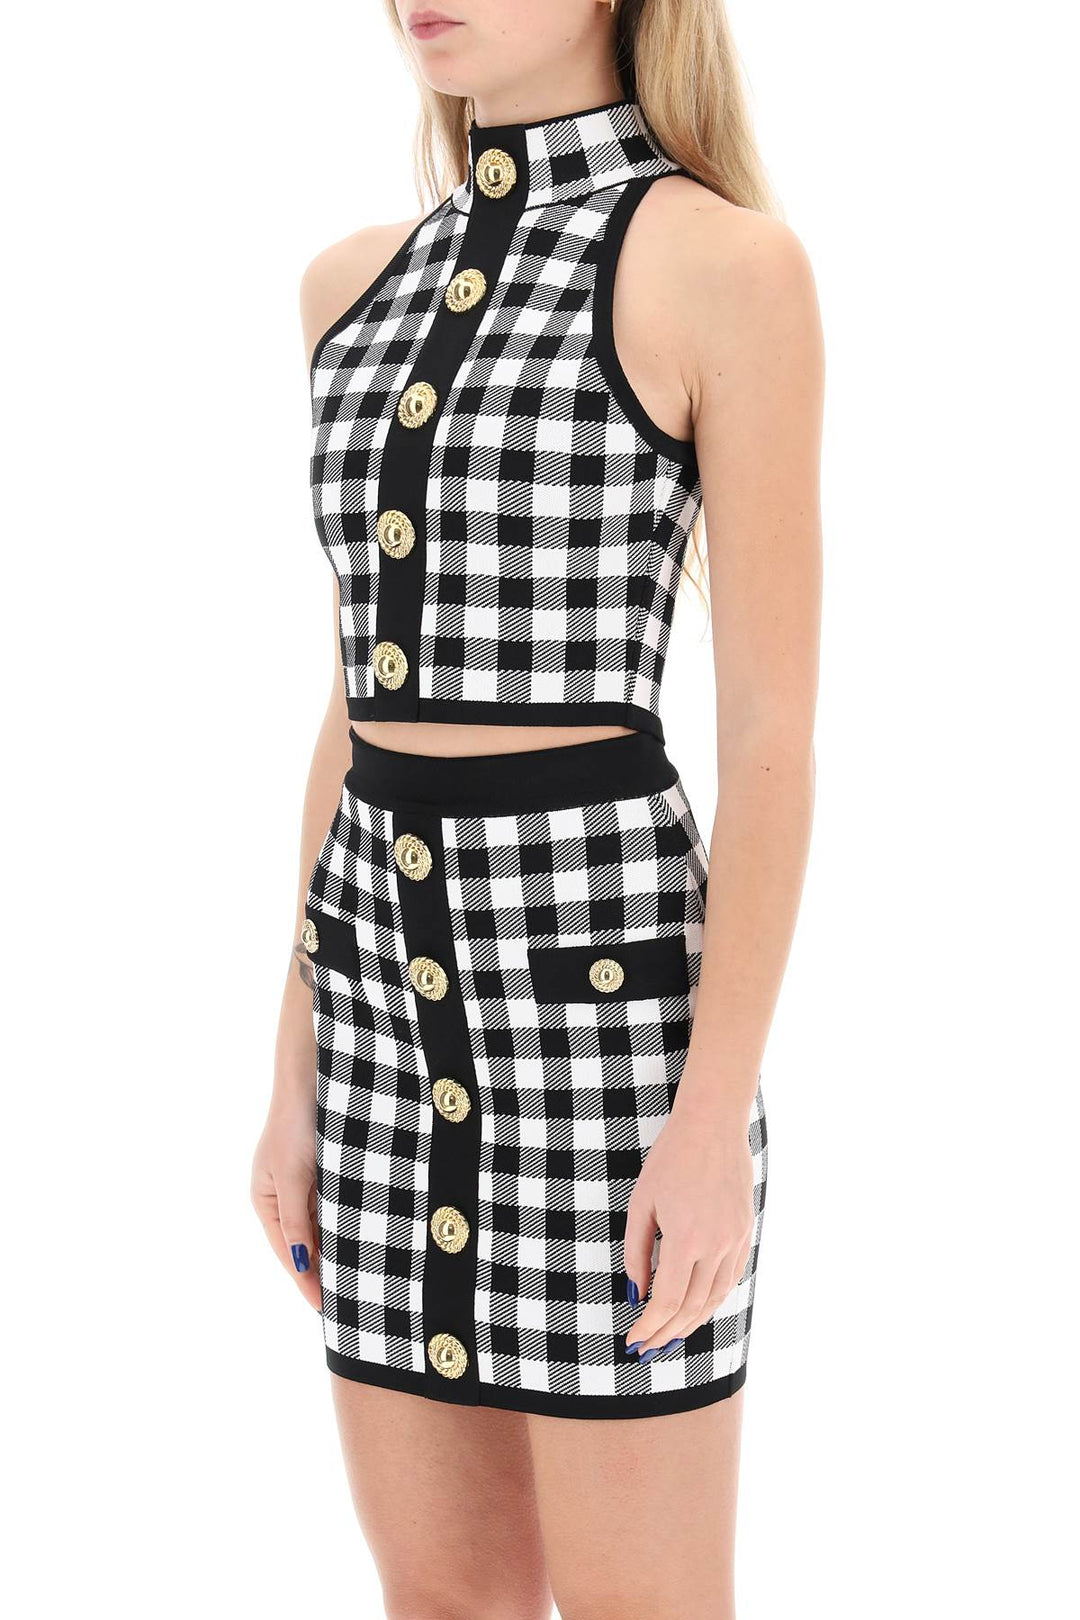 Balmain Gingham Knit Cropped Top With Embossed Buttons   Bianco